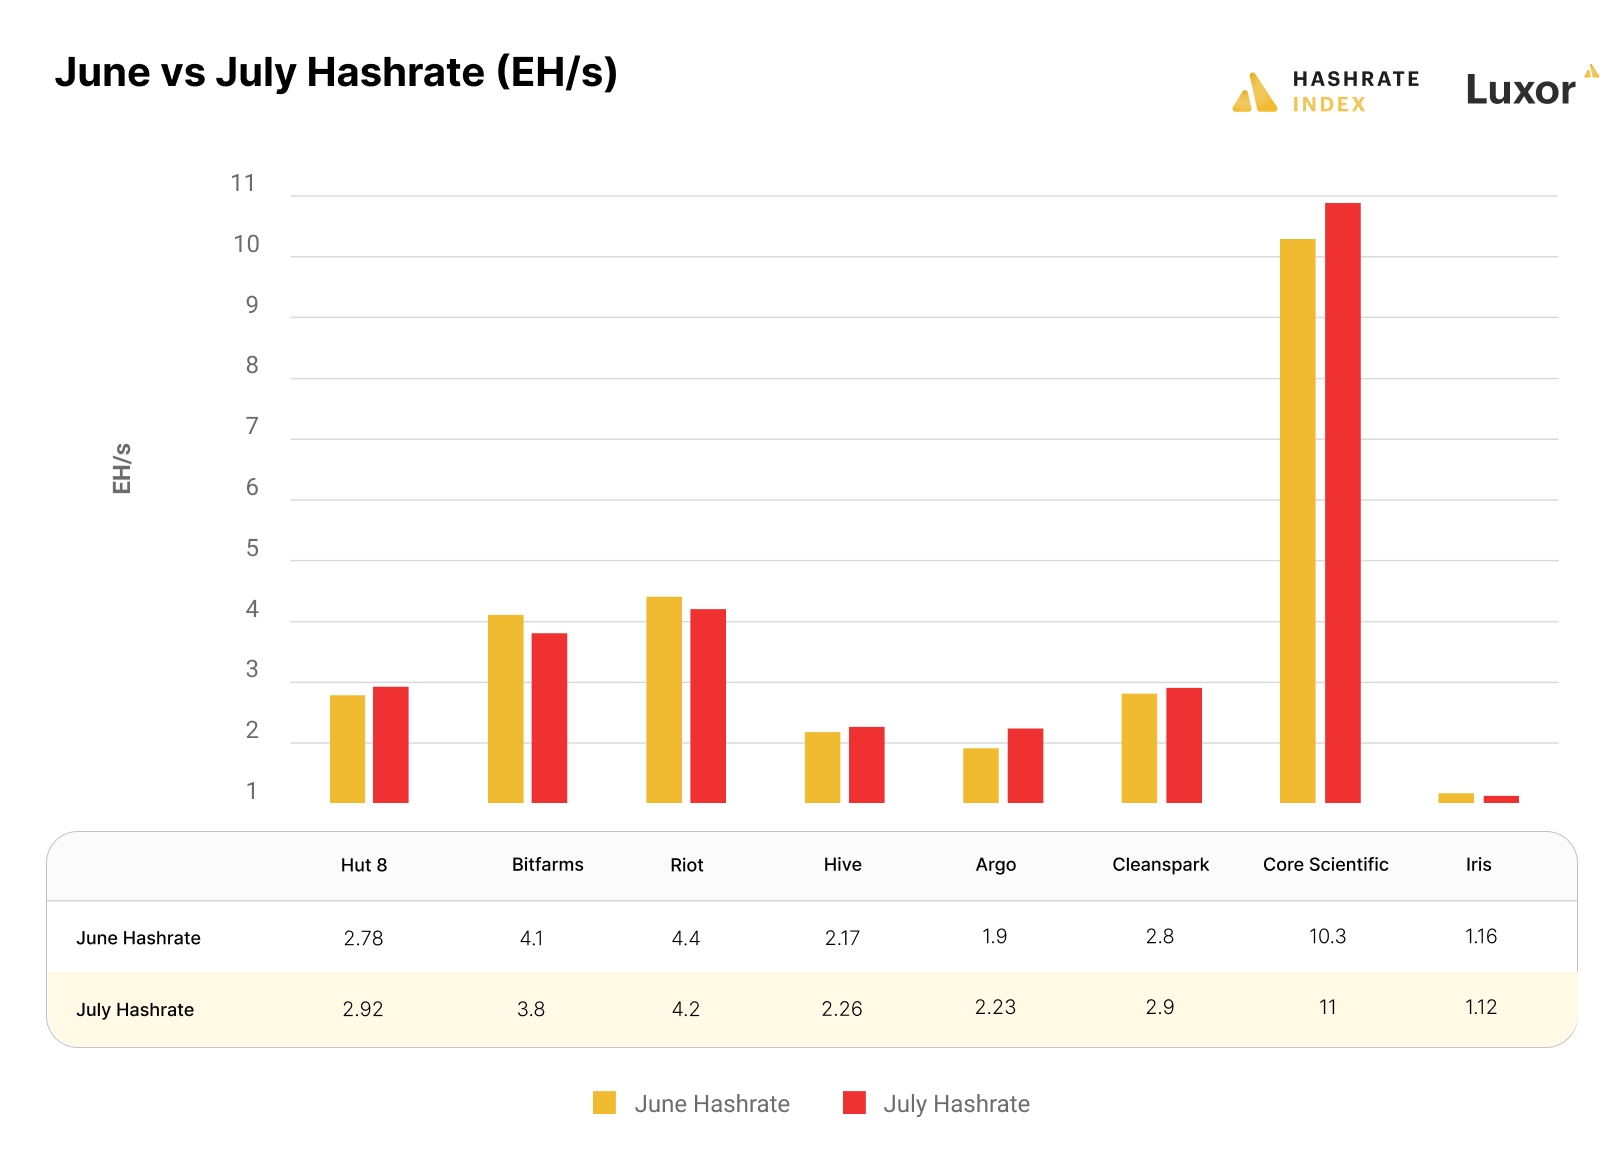 Many public miners grew their hashrate in July, 2022, while others saw a slight contraction for a variety of operational reasons | Source: public filings